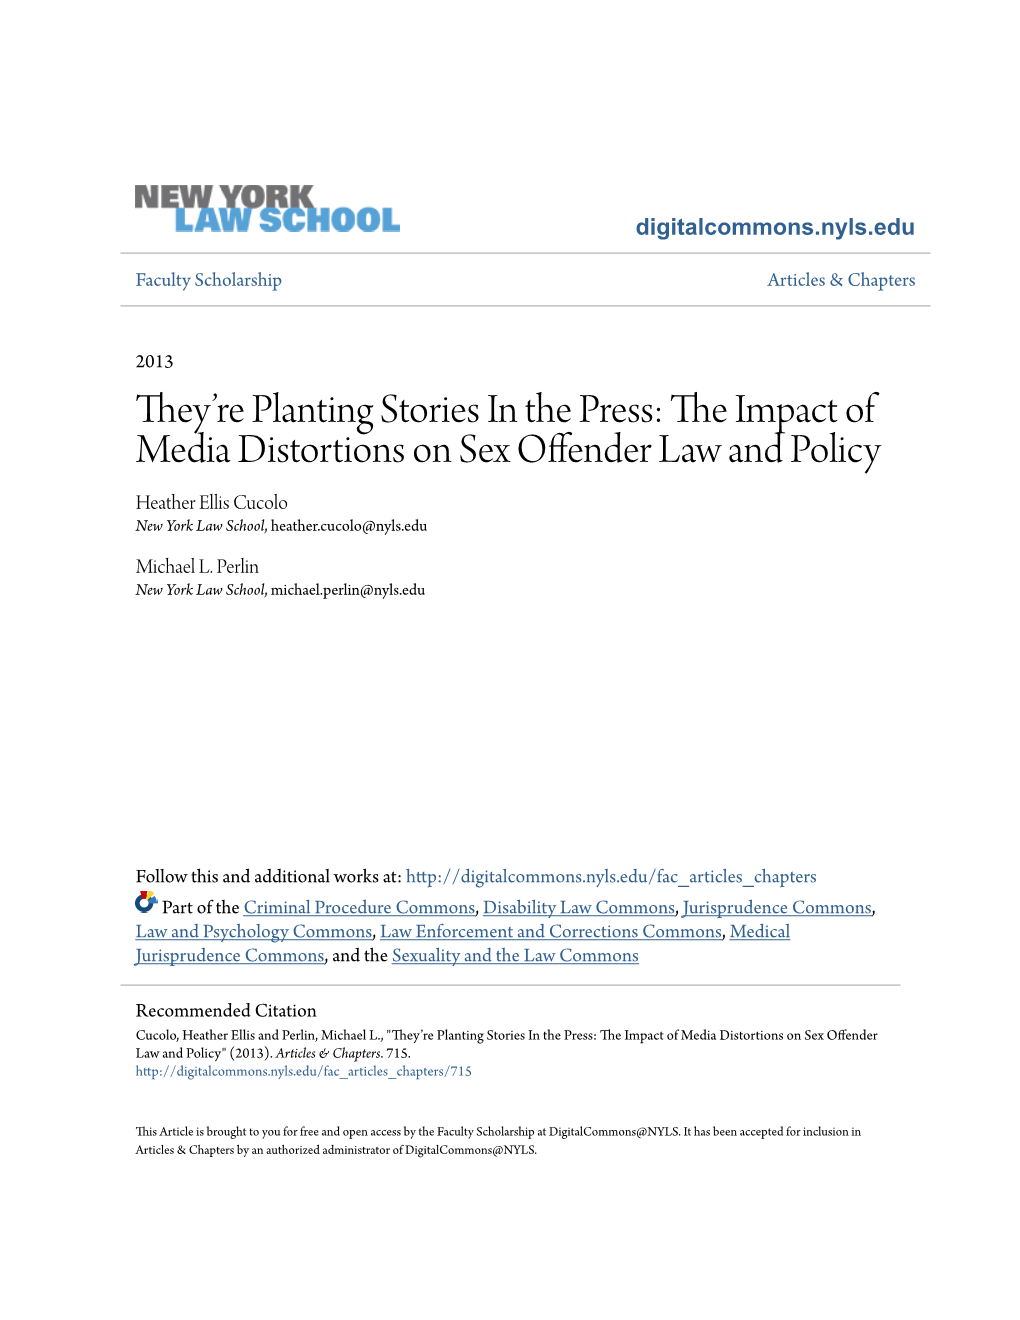 They're Planting Stories in the Press: the Impact of Media Distortions On